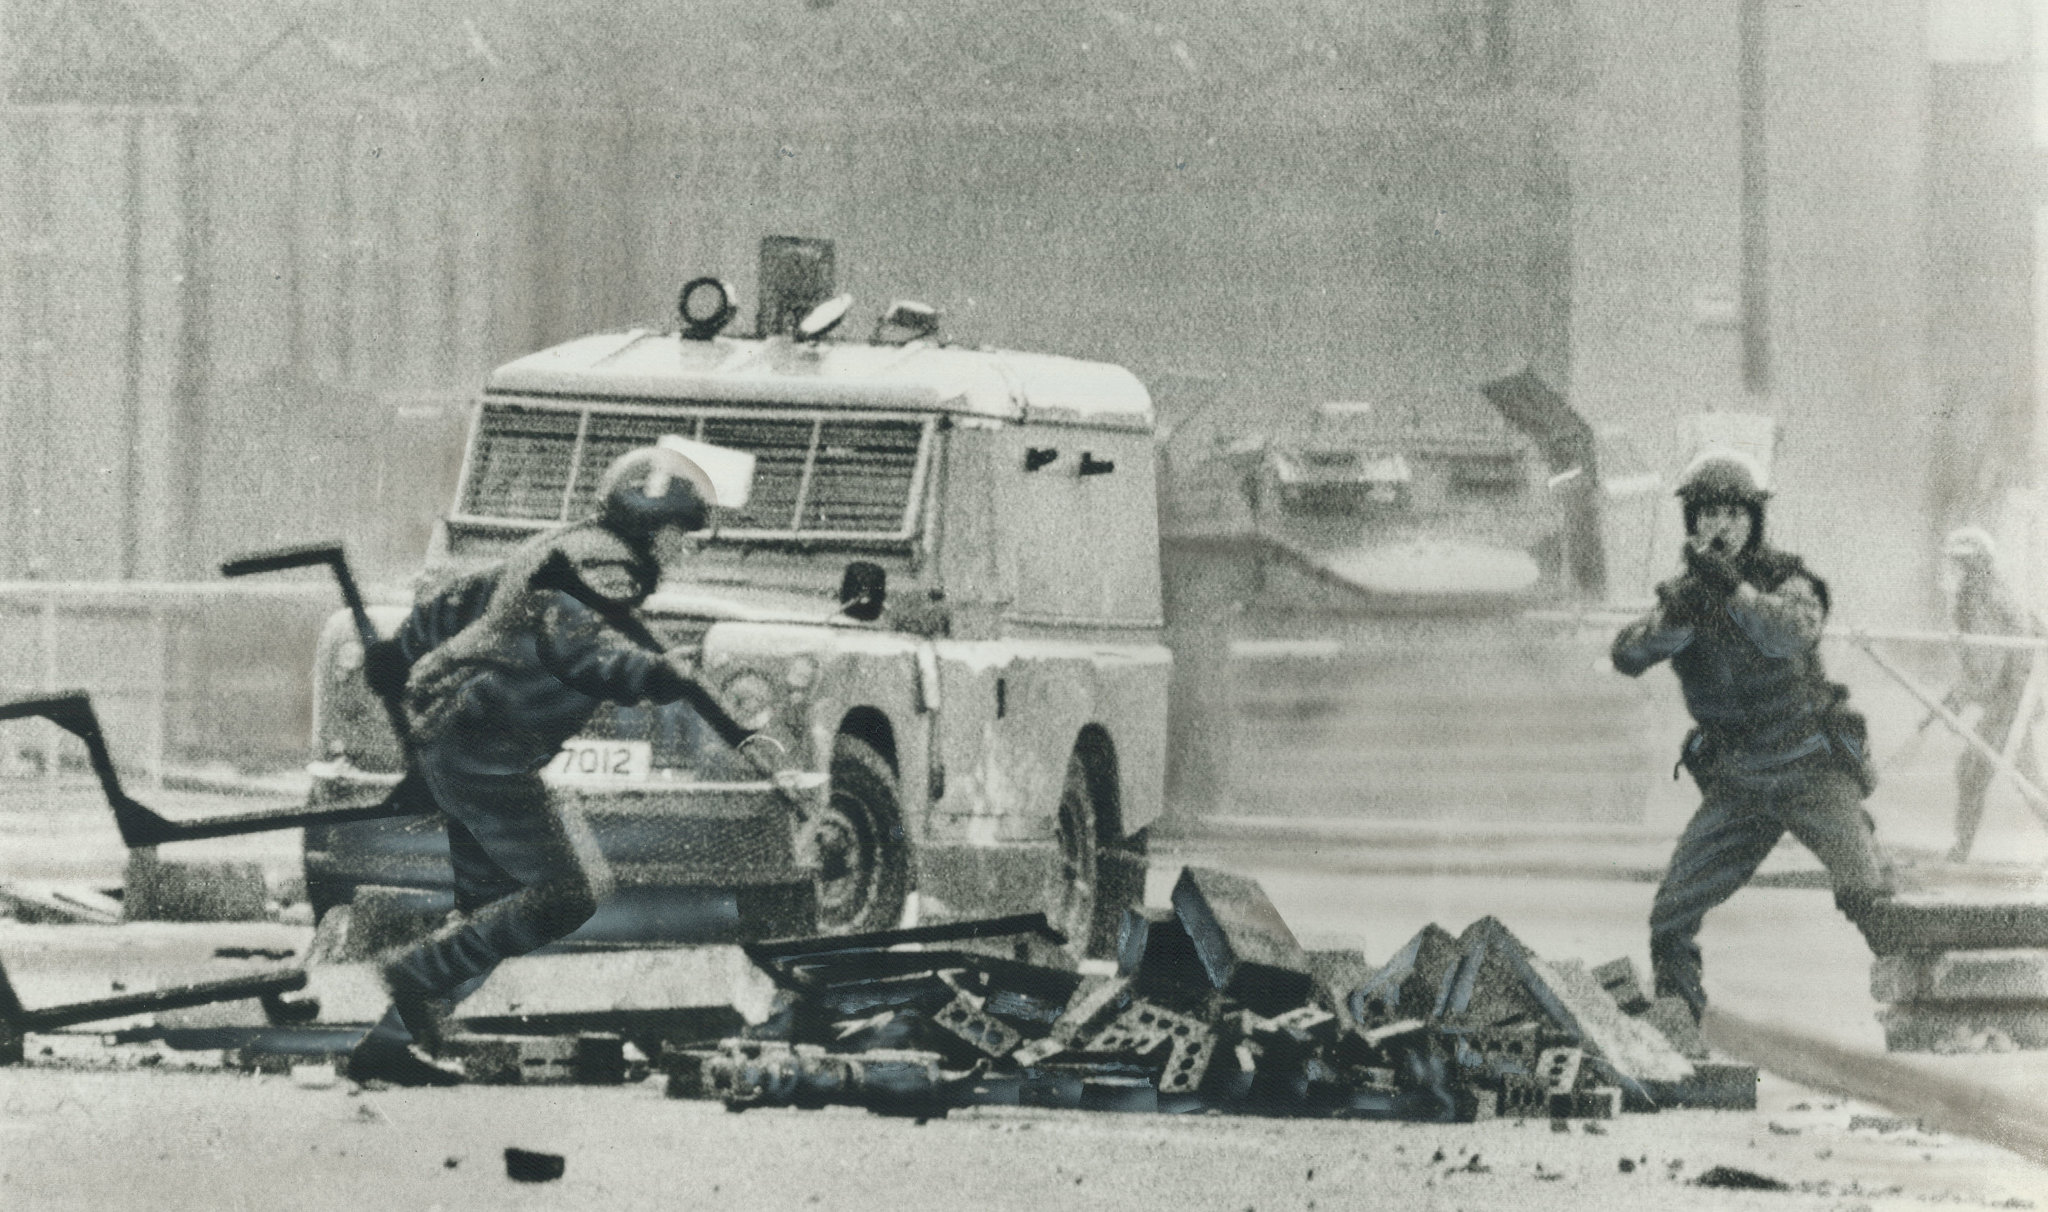 A British soldier fires plastic bullets at rioters in Belfast after the death of IRA hunger striker Bobby Sands. (Photo: Boris Spremo / Toronto Star via Getty)